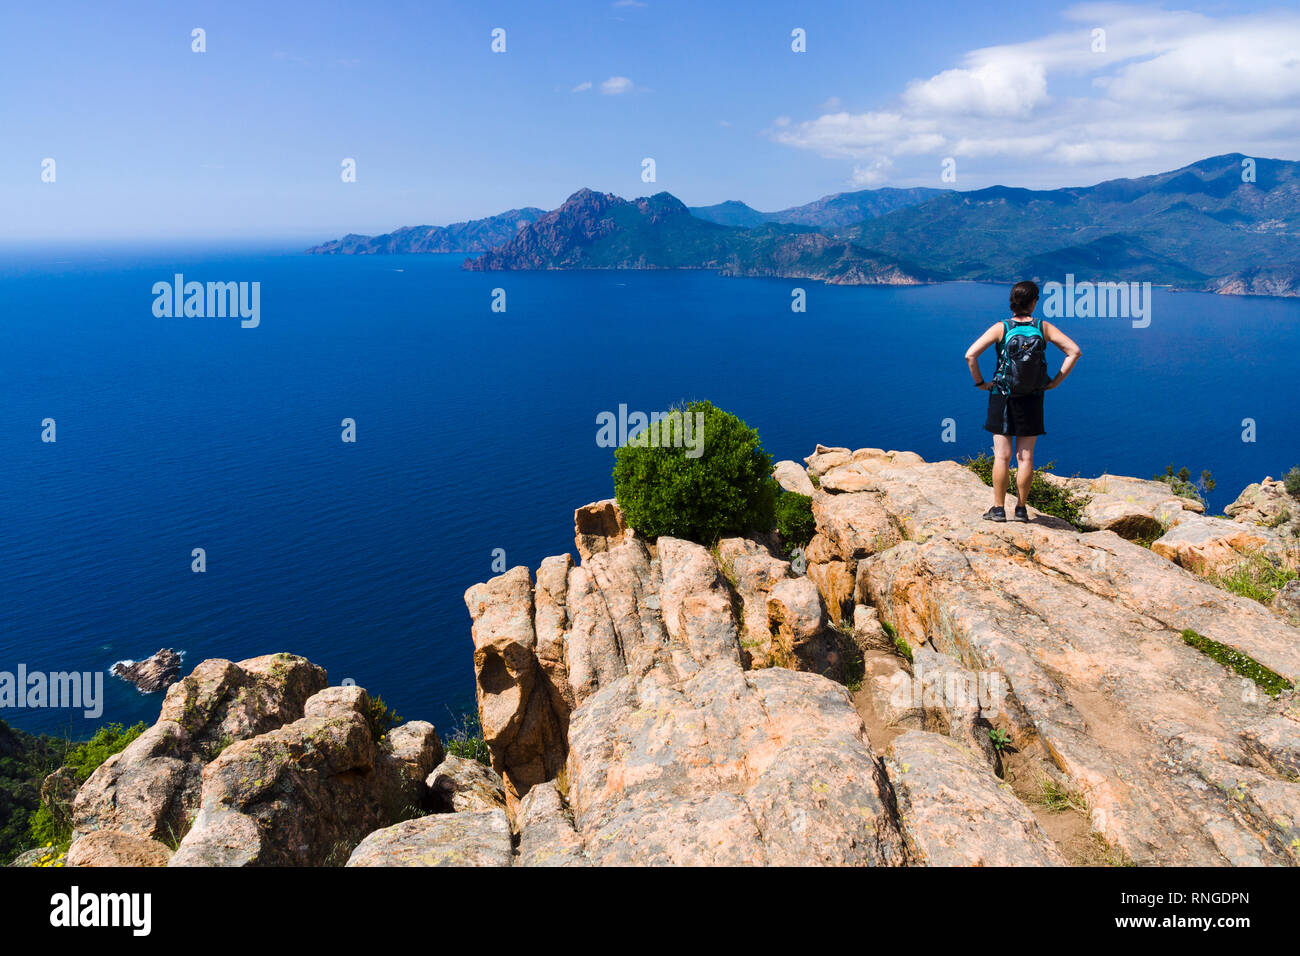 View over Gulf of Porto from Chateau Fort viewpoint, Calanques de Piana, Corsica, France Stock Photo